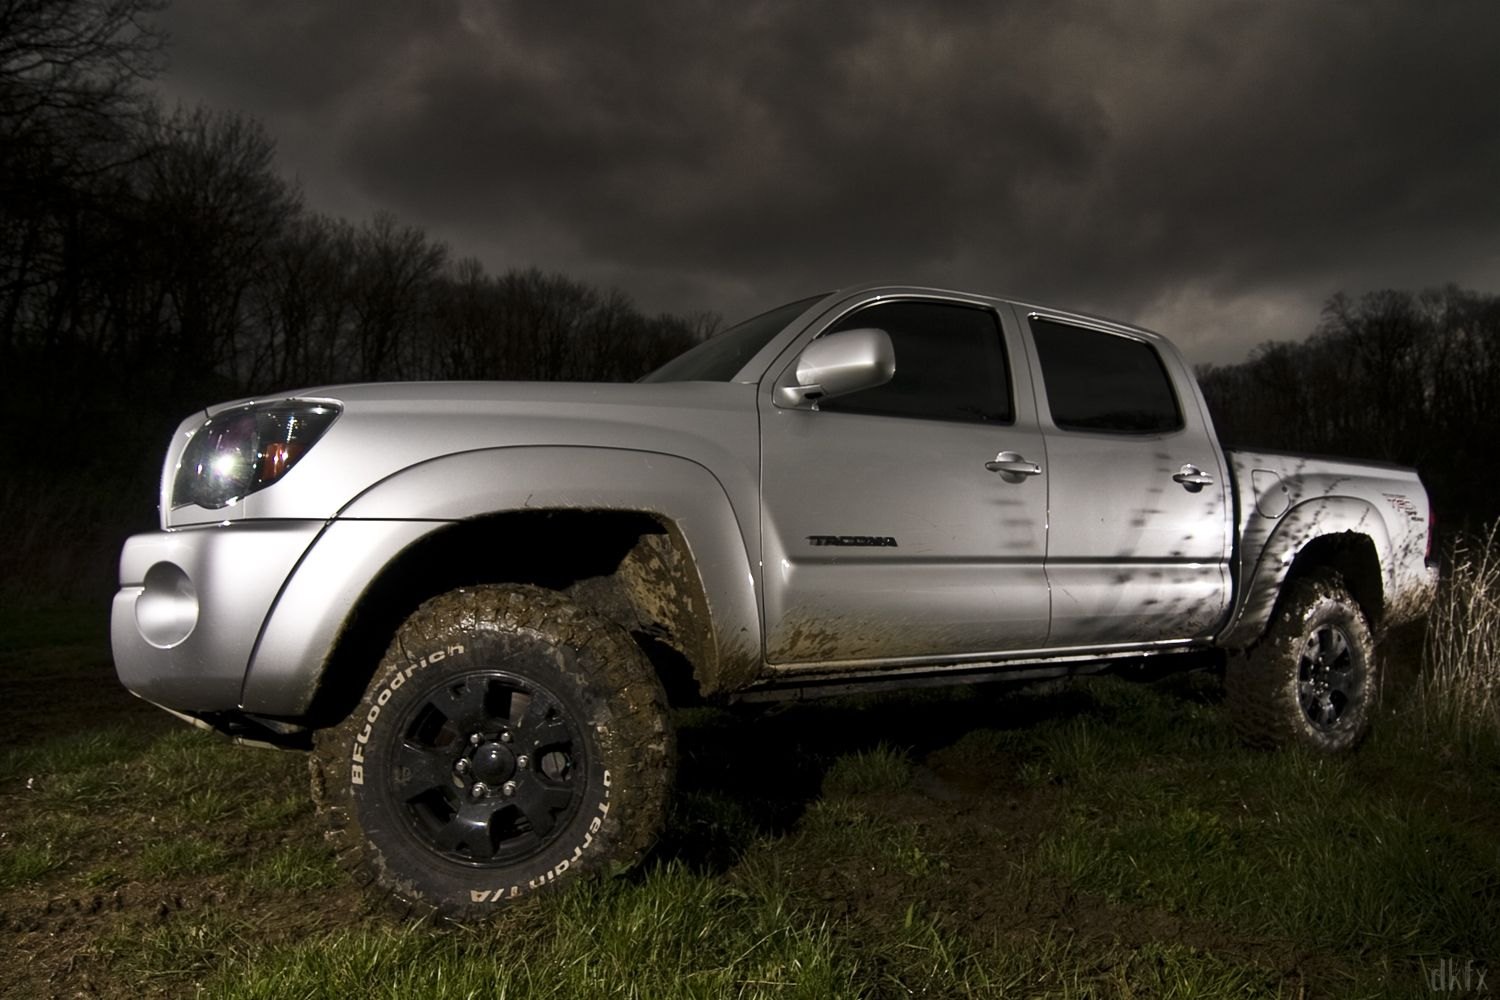 Silver Toyota Tacoma with BFGoodrich Tires - Photo by dan kinzie